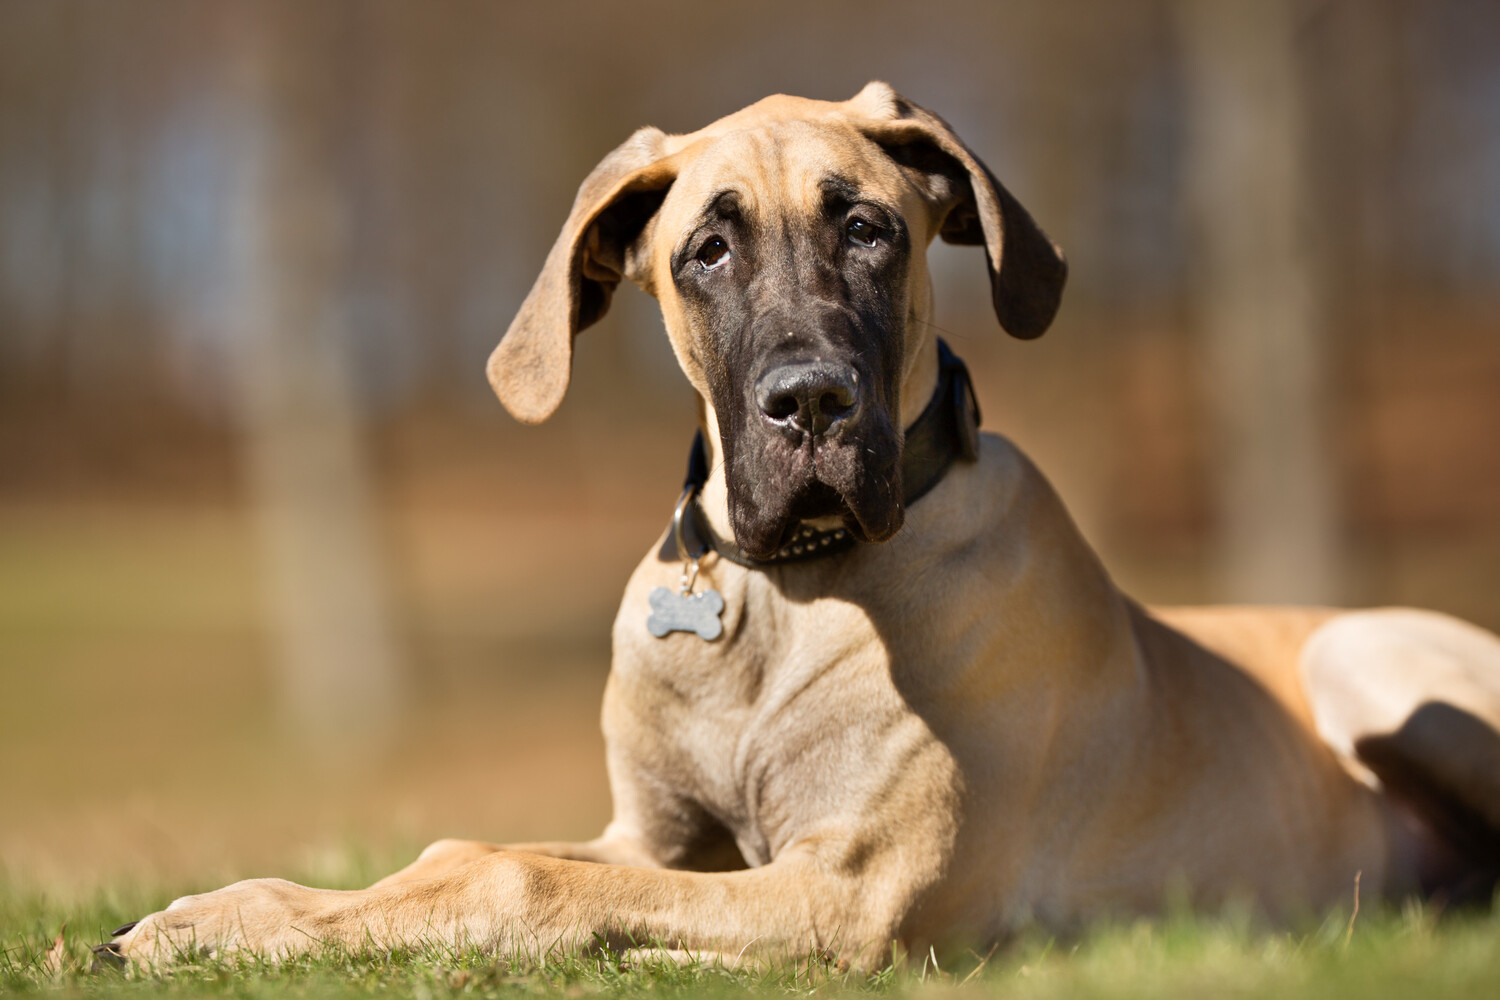 What Are Common Dog Breeds That Get Cancer